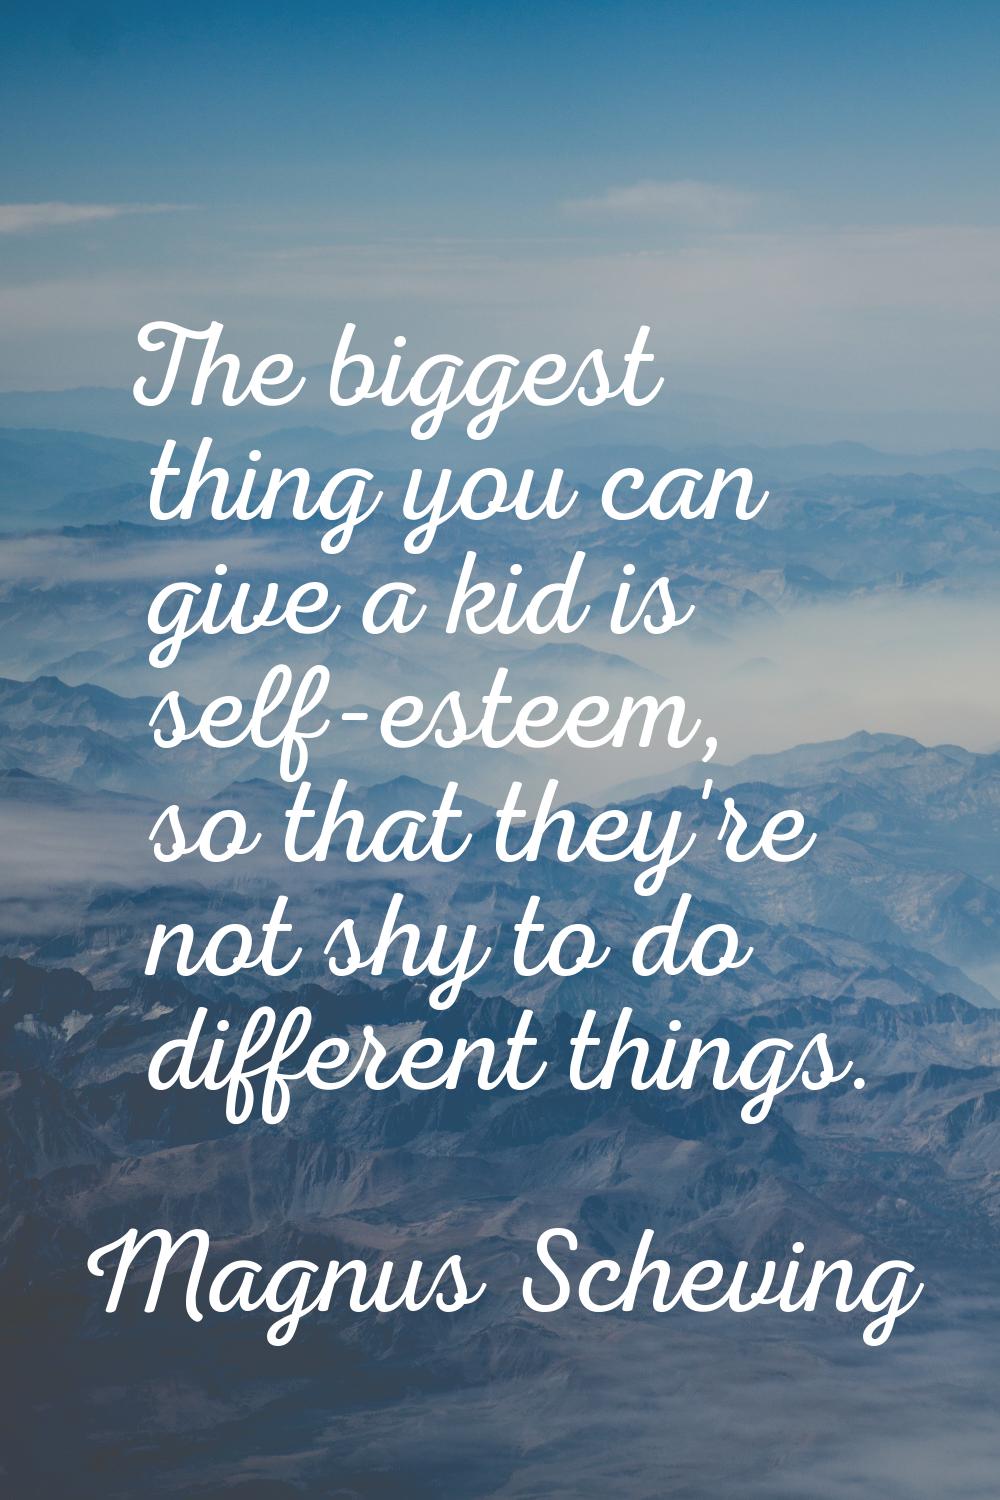 The biggest thing you can give a kid is self-esteem, so that they're not shy to do different things